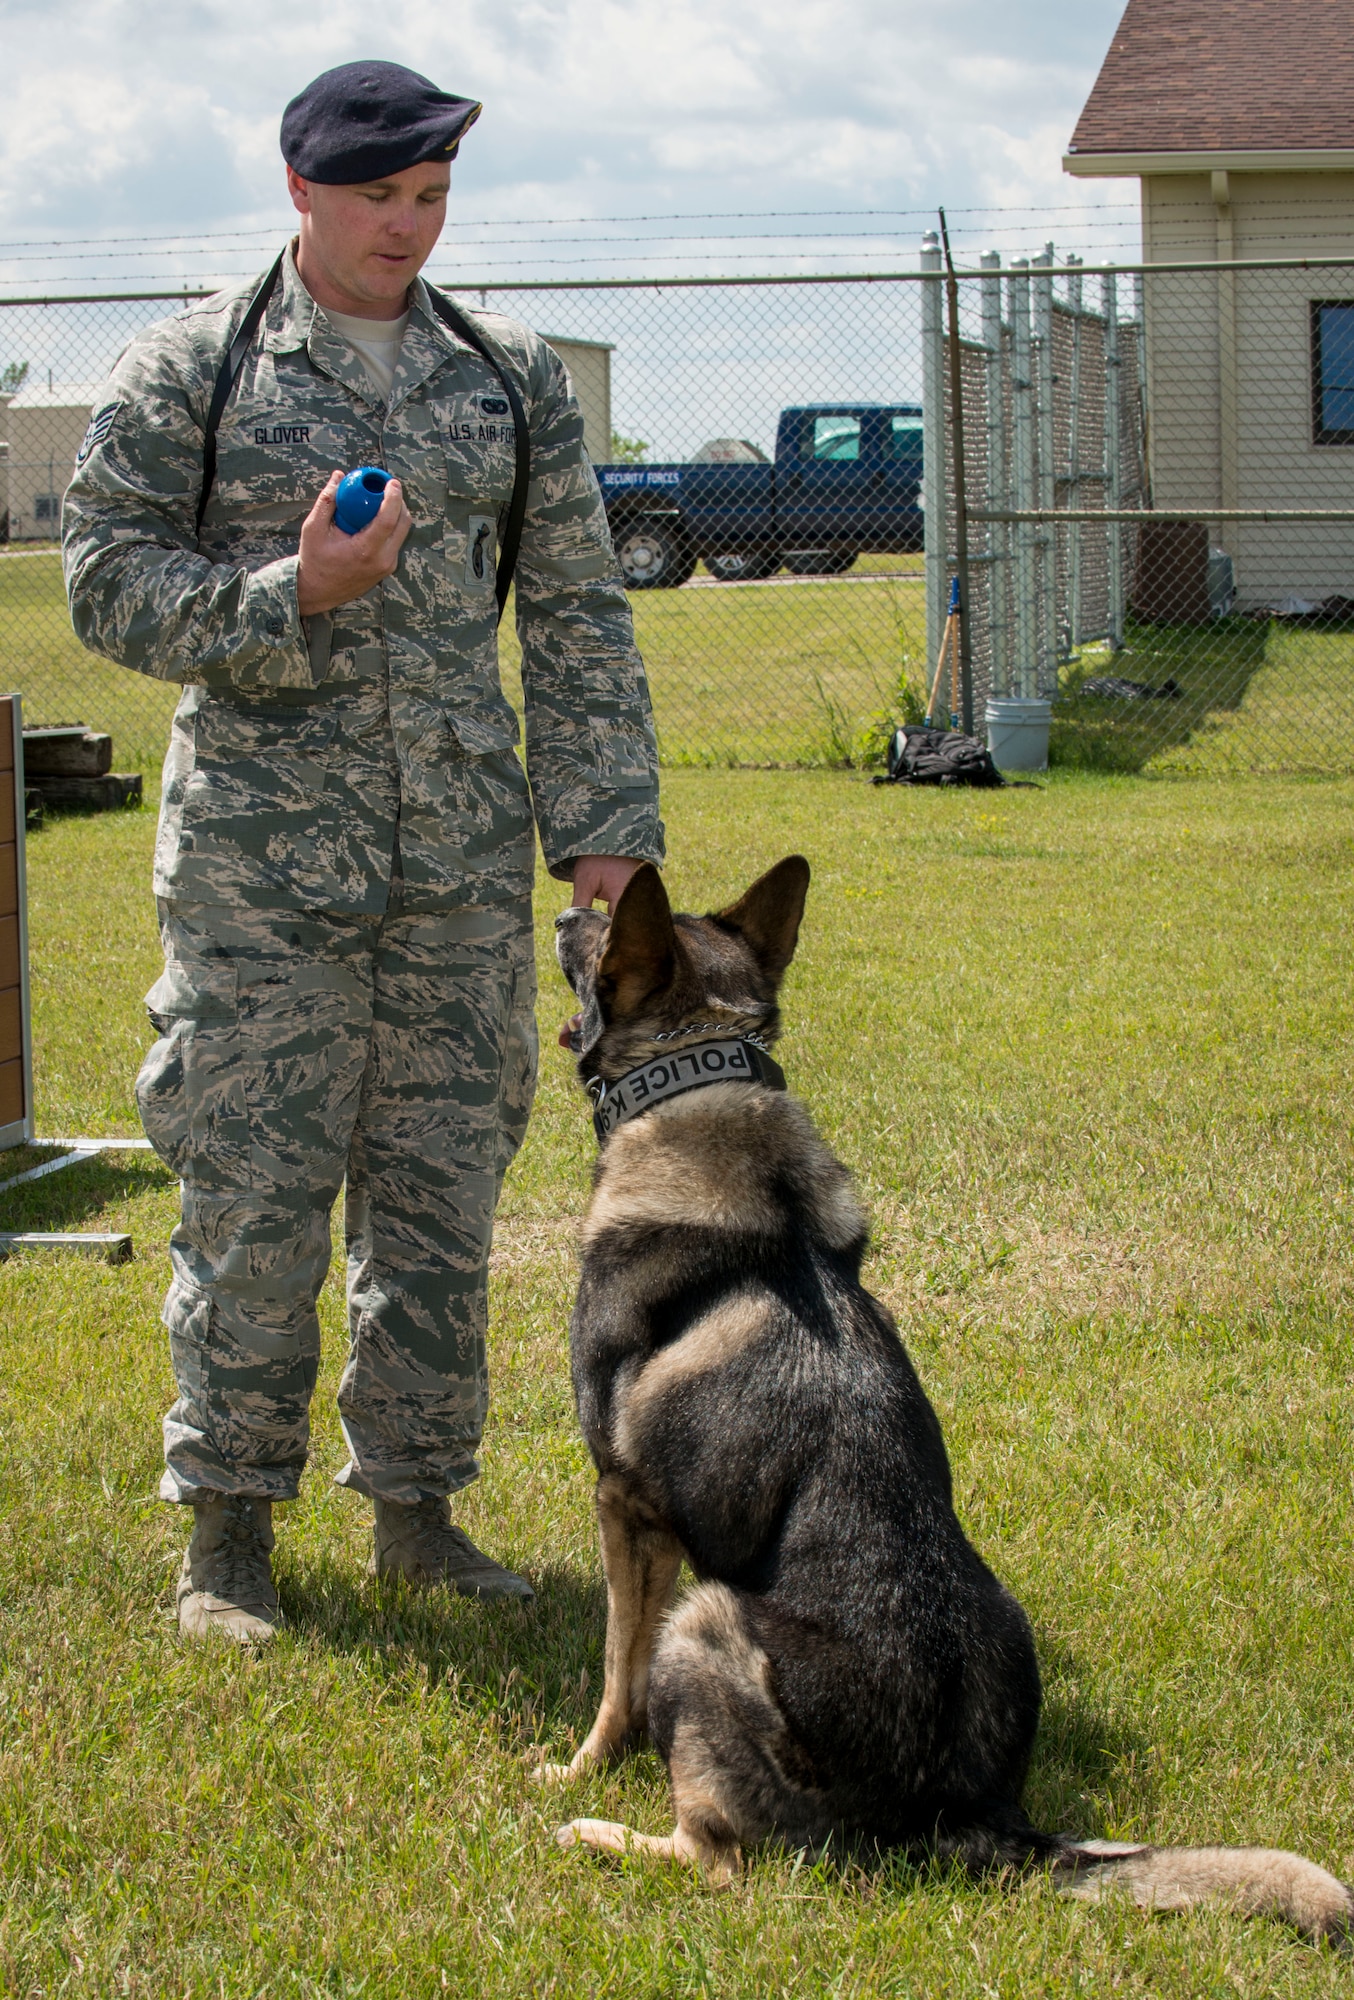 Staff Sgt. Tim Glover, 5th Security Forces Squadron military working dog handler, prepares to throw a toy for his MWD Roko during a game of fetch at the kennels on Minot Air Force Base, N.D., July 28, 2014. Playing games and going for walks with his dog enables Glover to build trust and a strong rapport with Roko. (U.S. Air Force photo/Senior Airman Stephanie Morris)